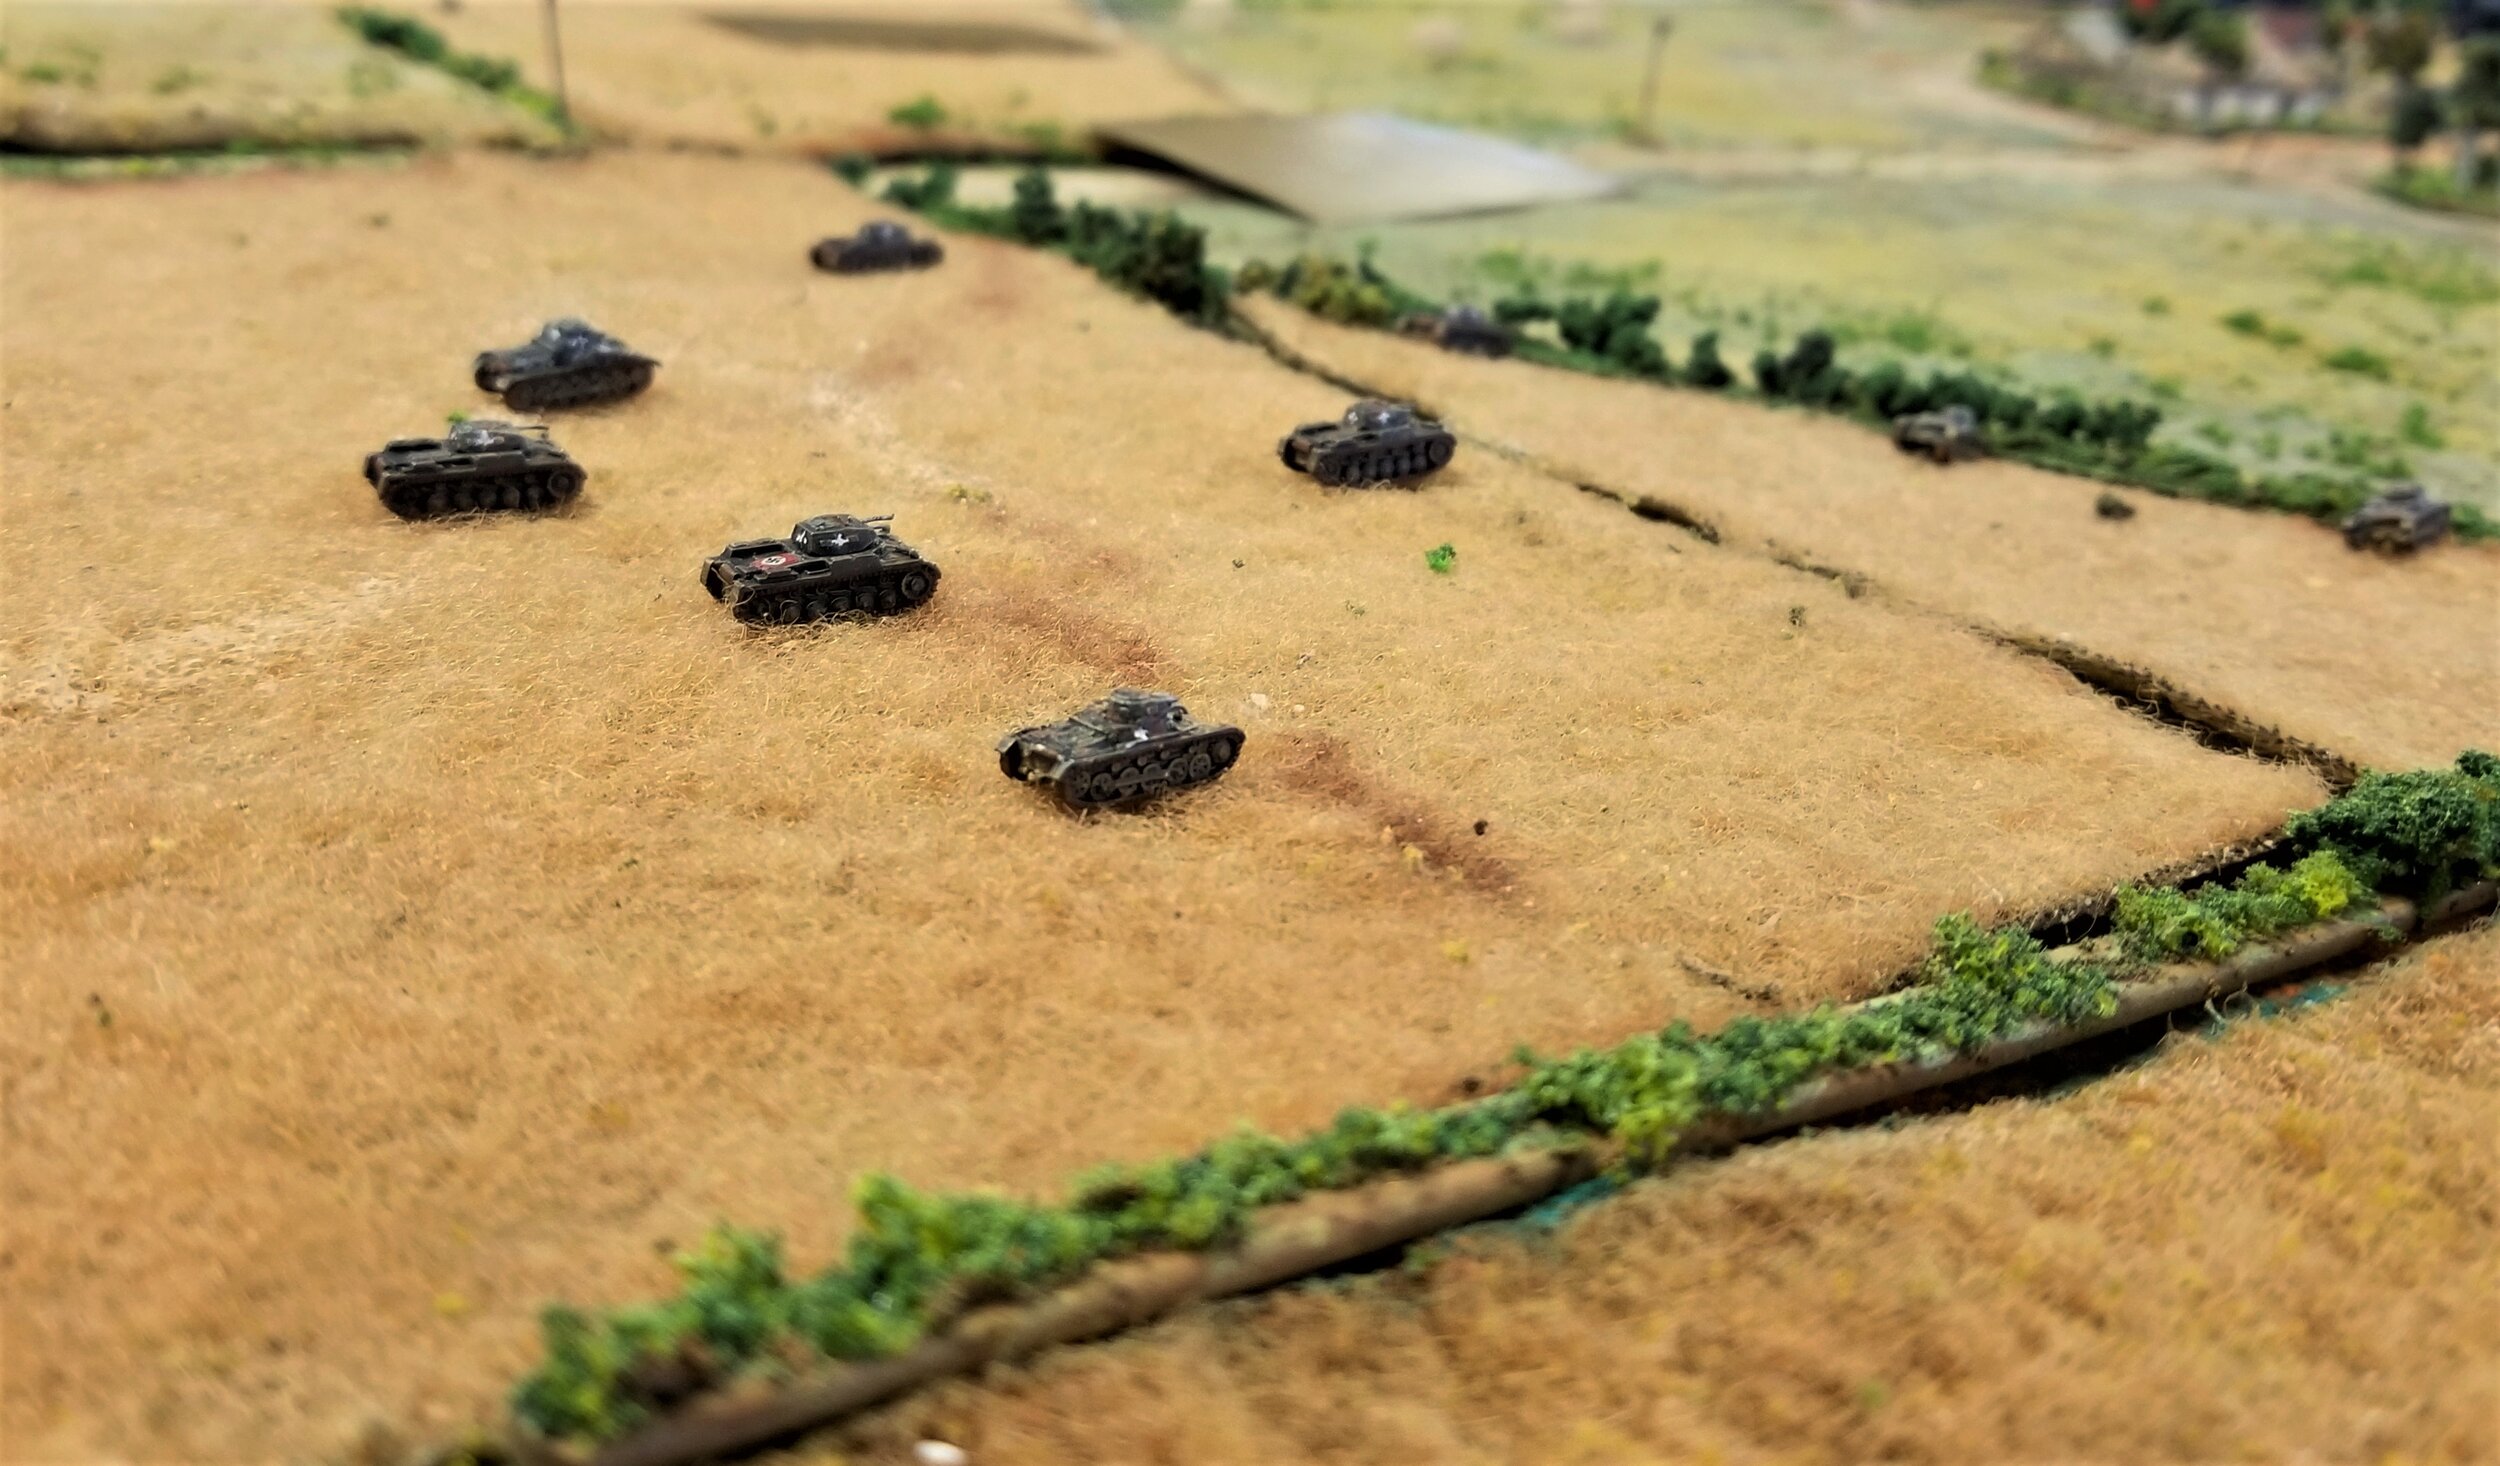 Panzers move in